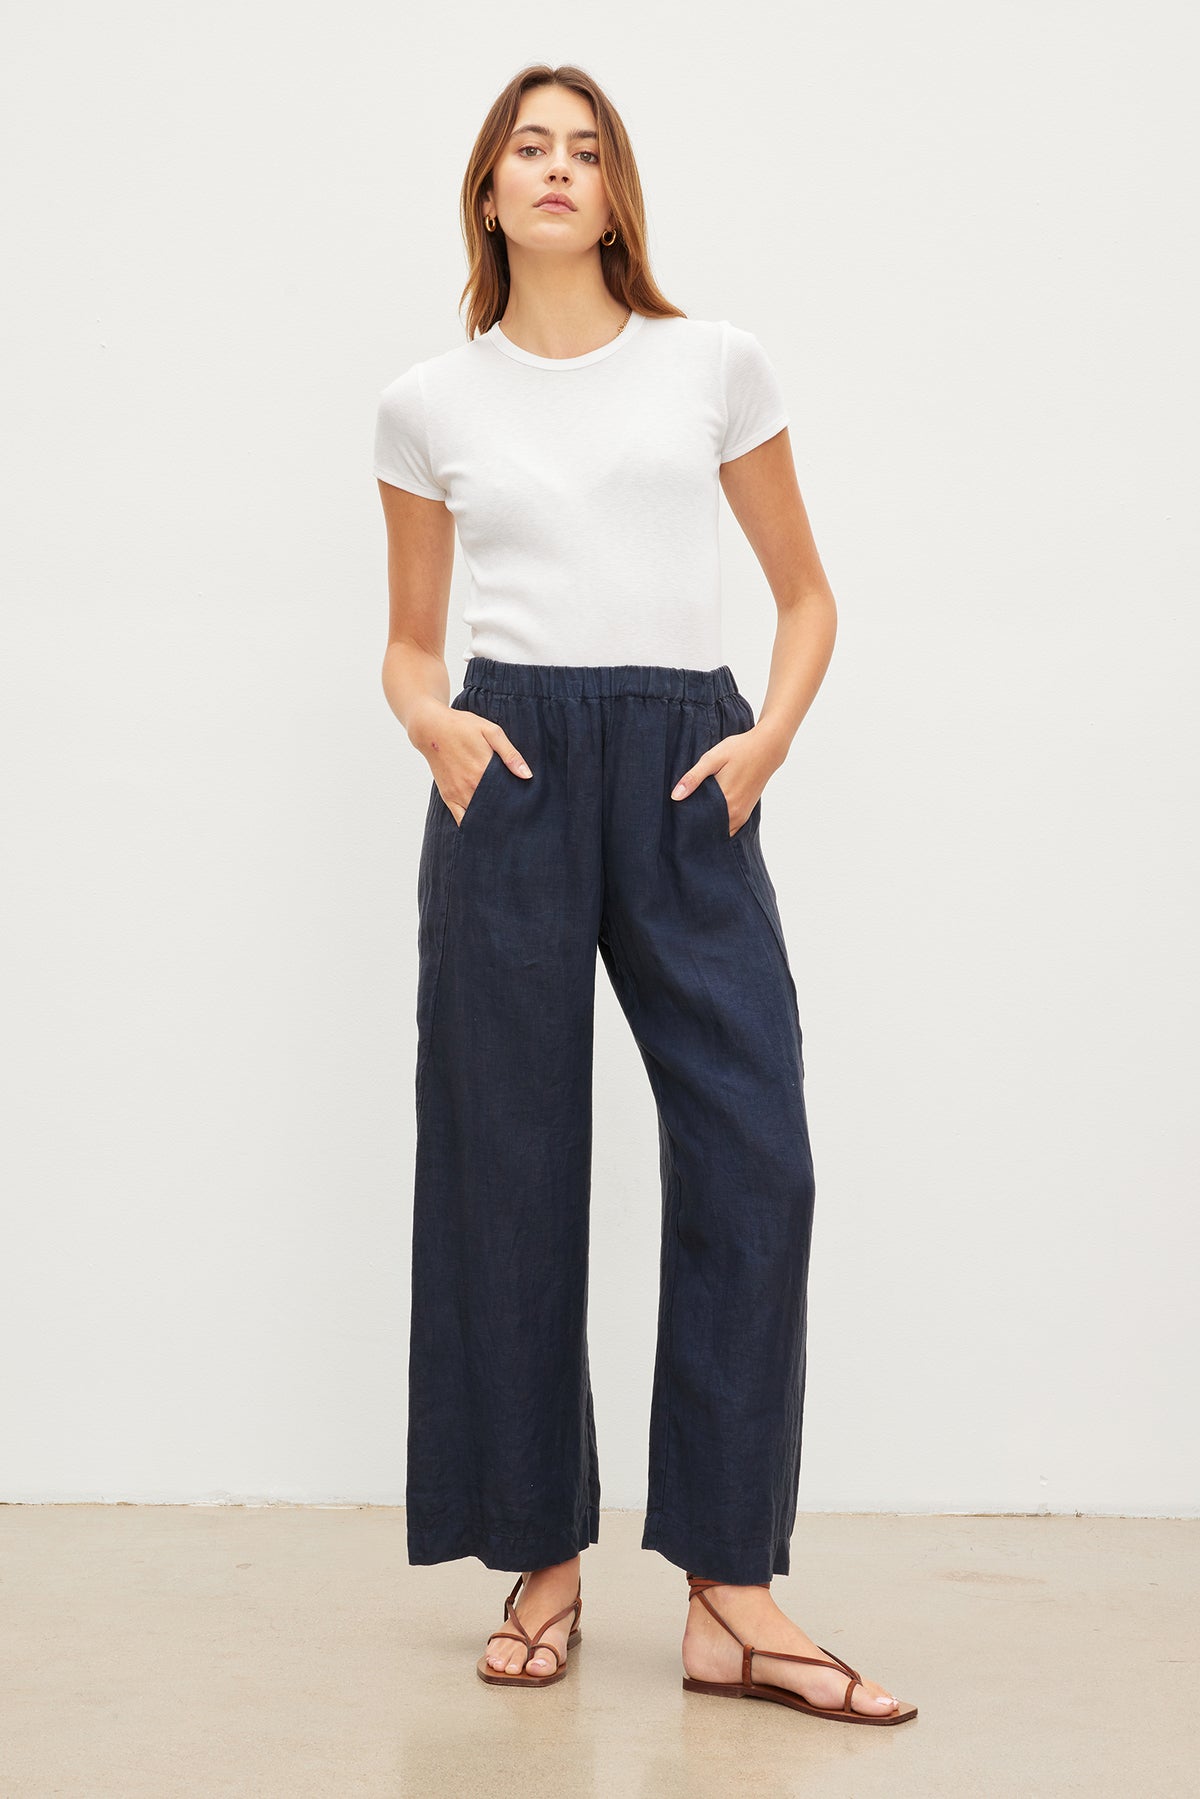 A woman in blue LOLA LINEN PANTS by Velvet by Graham & Spencer with an elastic waist.-36002607595713